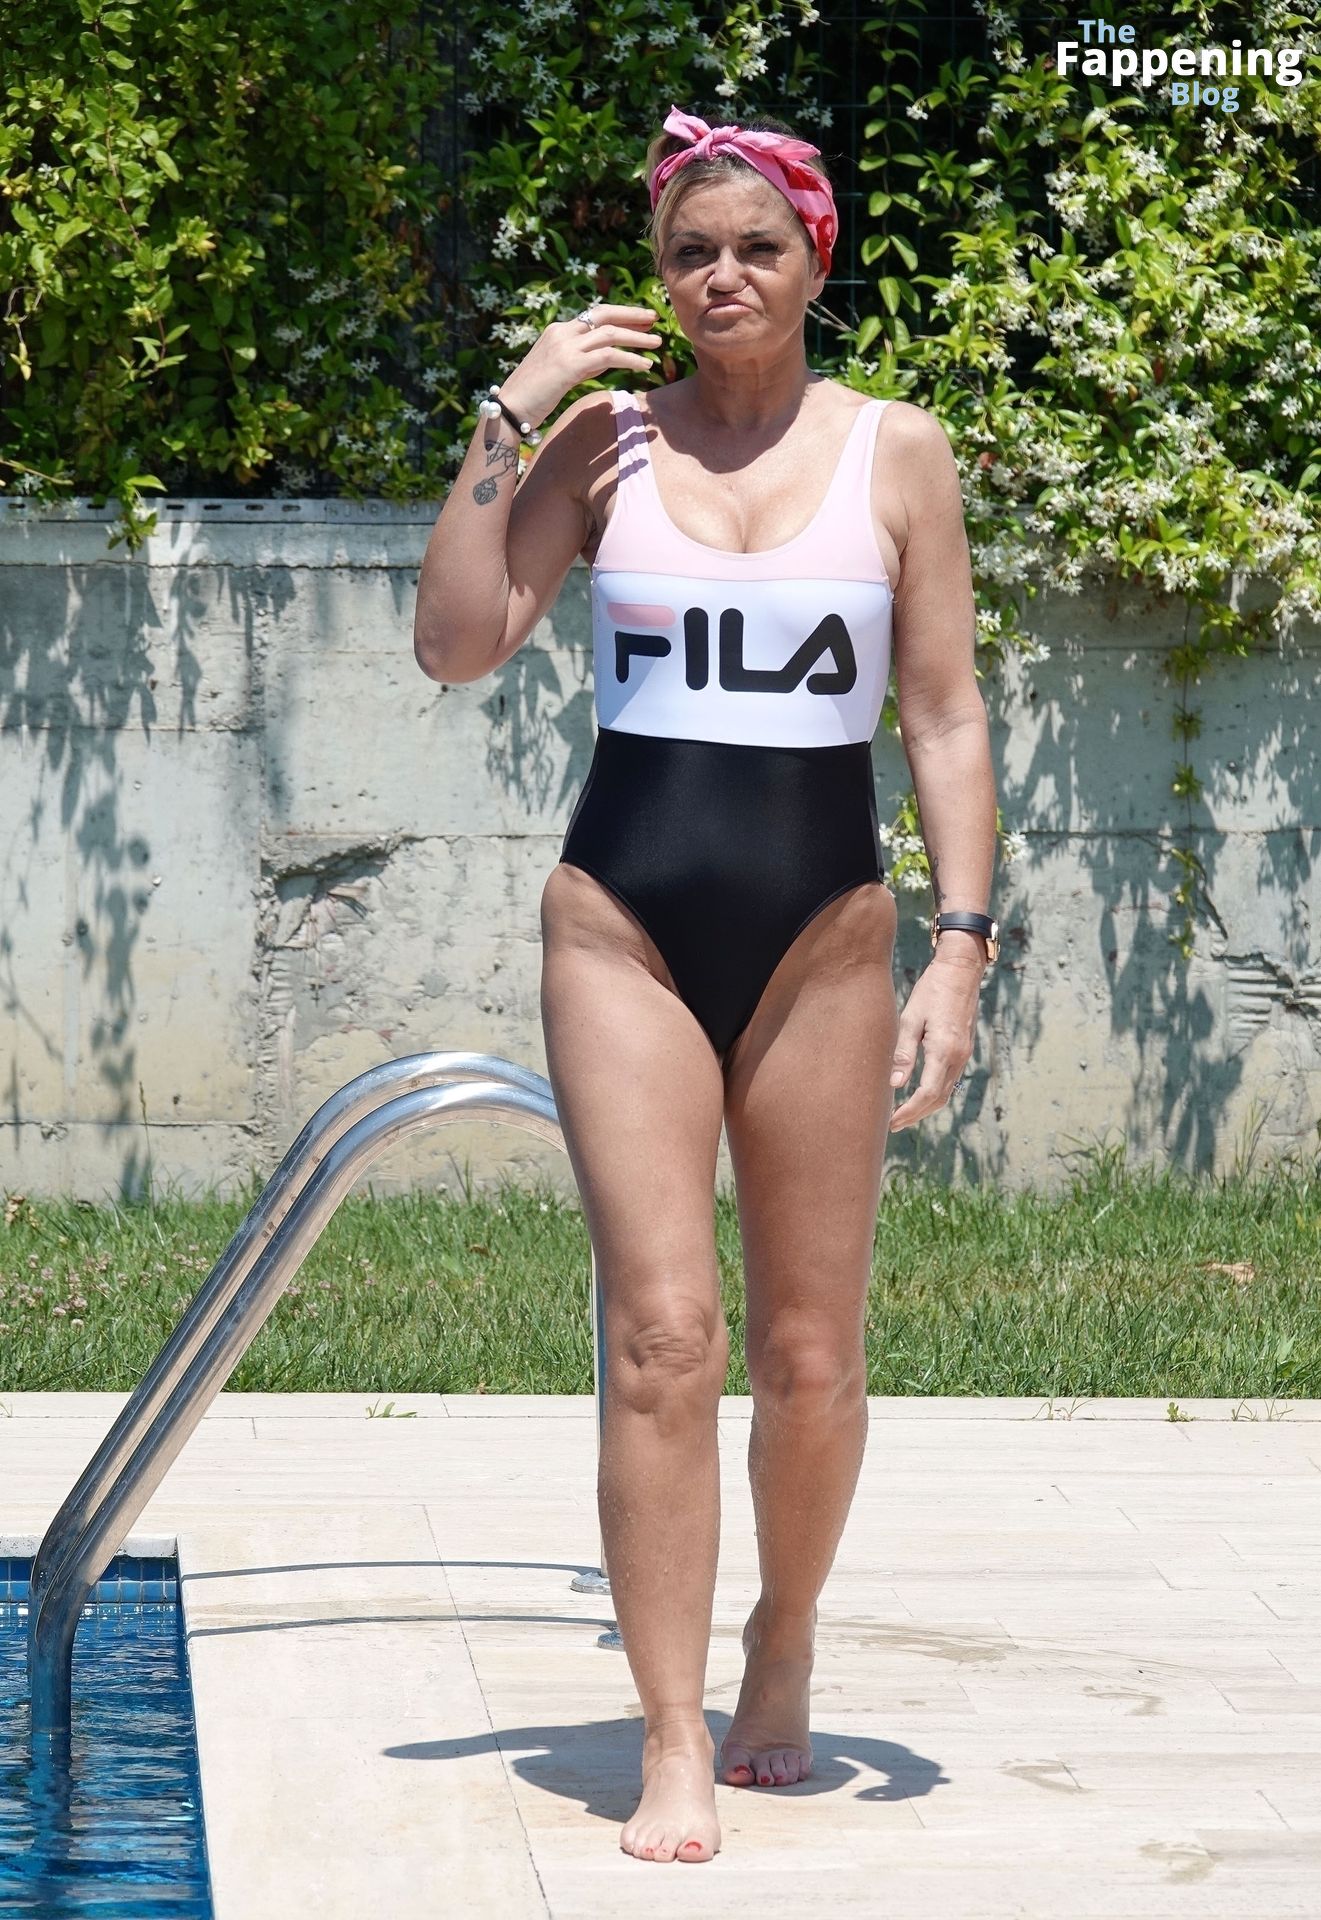 Danniella Westbrook is Pictured Rocking a Fila Swimsuit in Turkey (30 Photos)